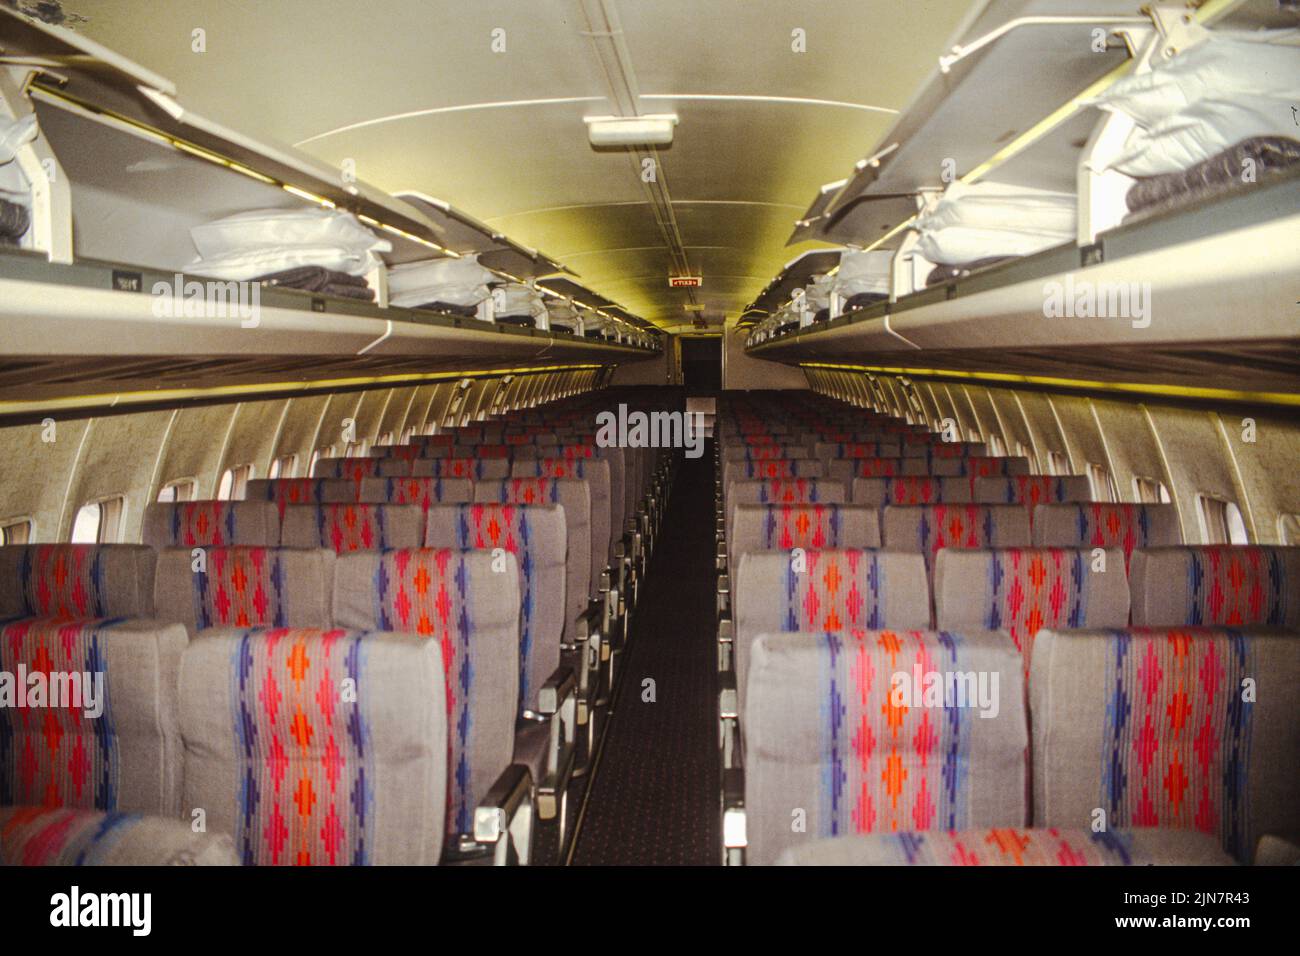 Airliner-Interieur Stockfoto